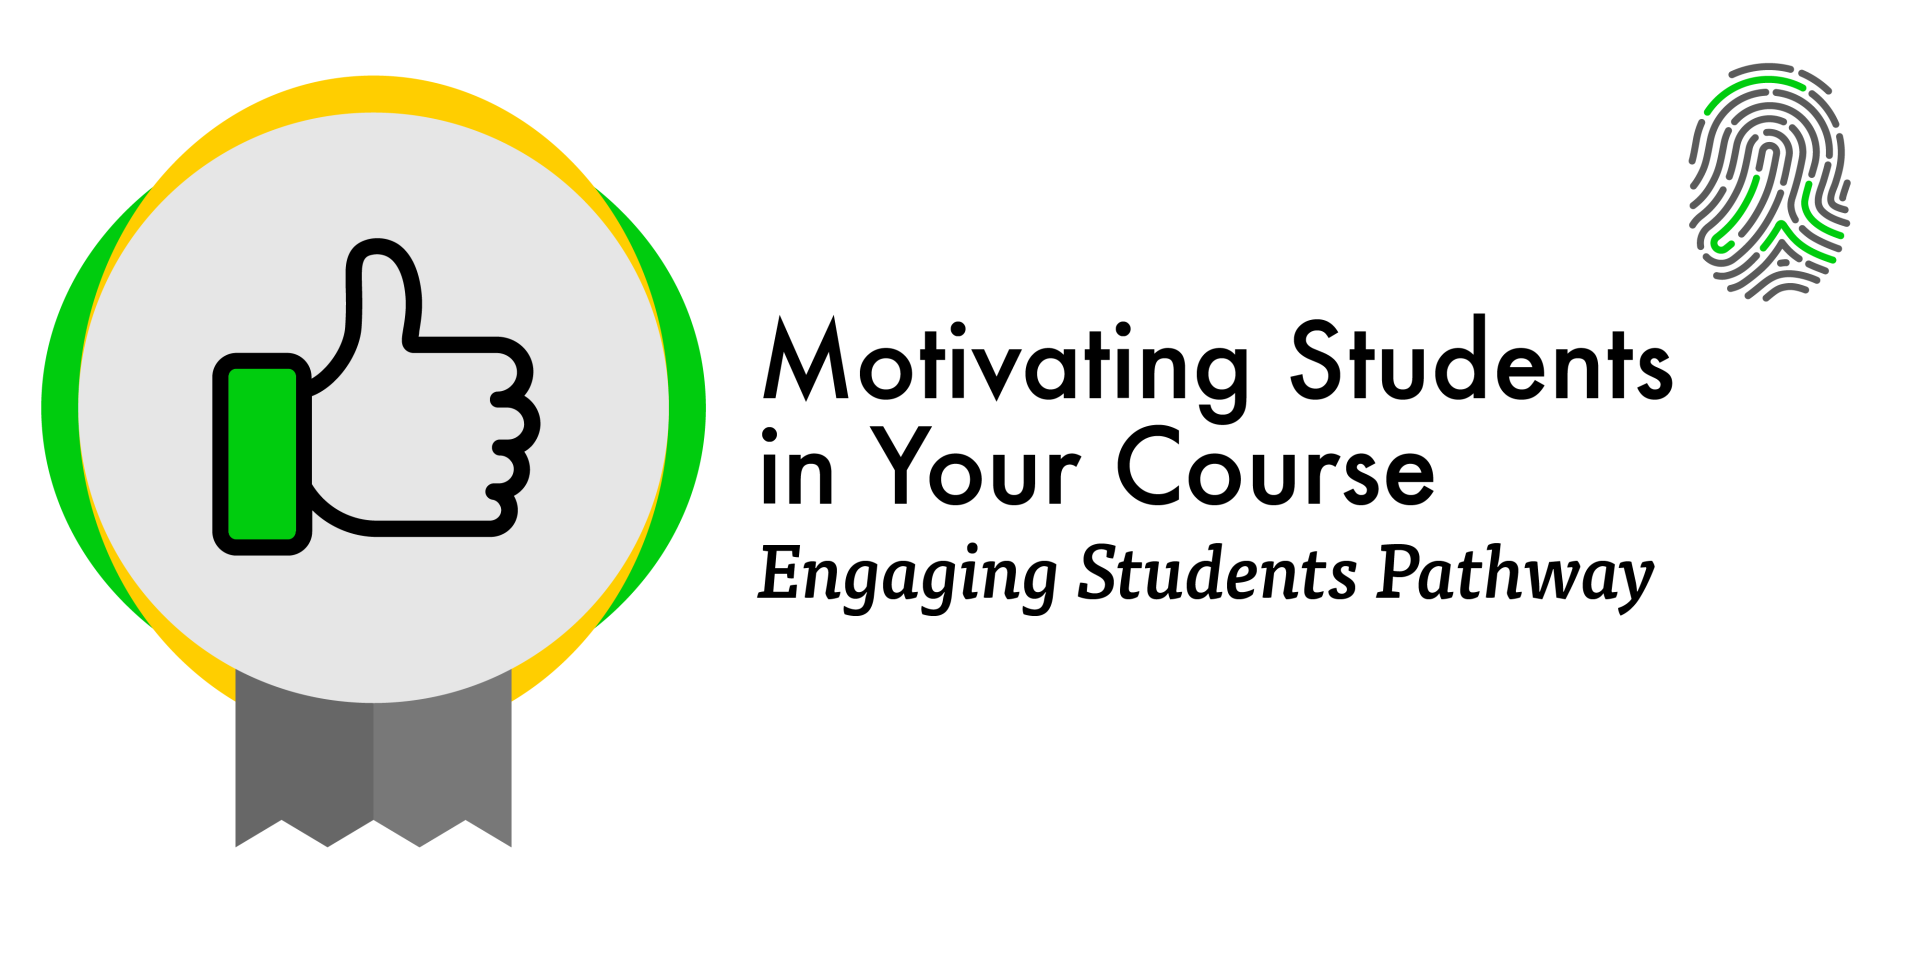 Motivating Students in Your Course, Engaging Students Pathway